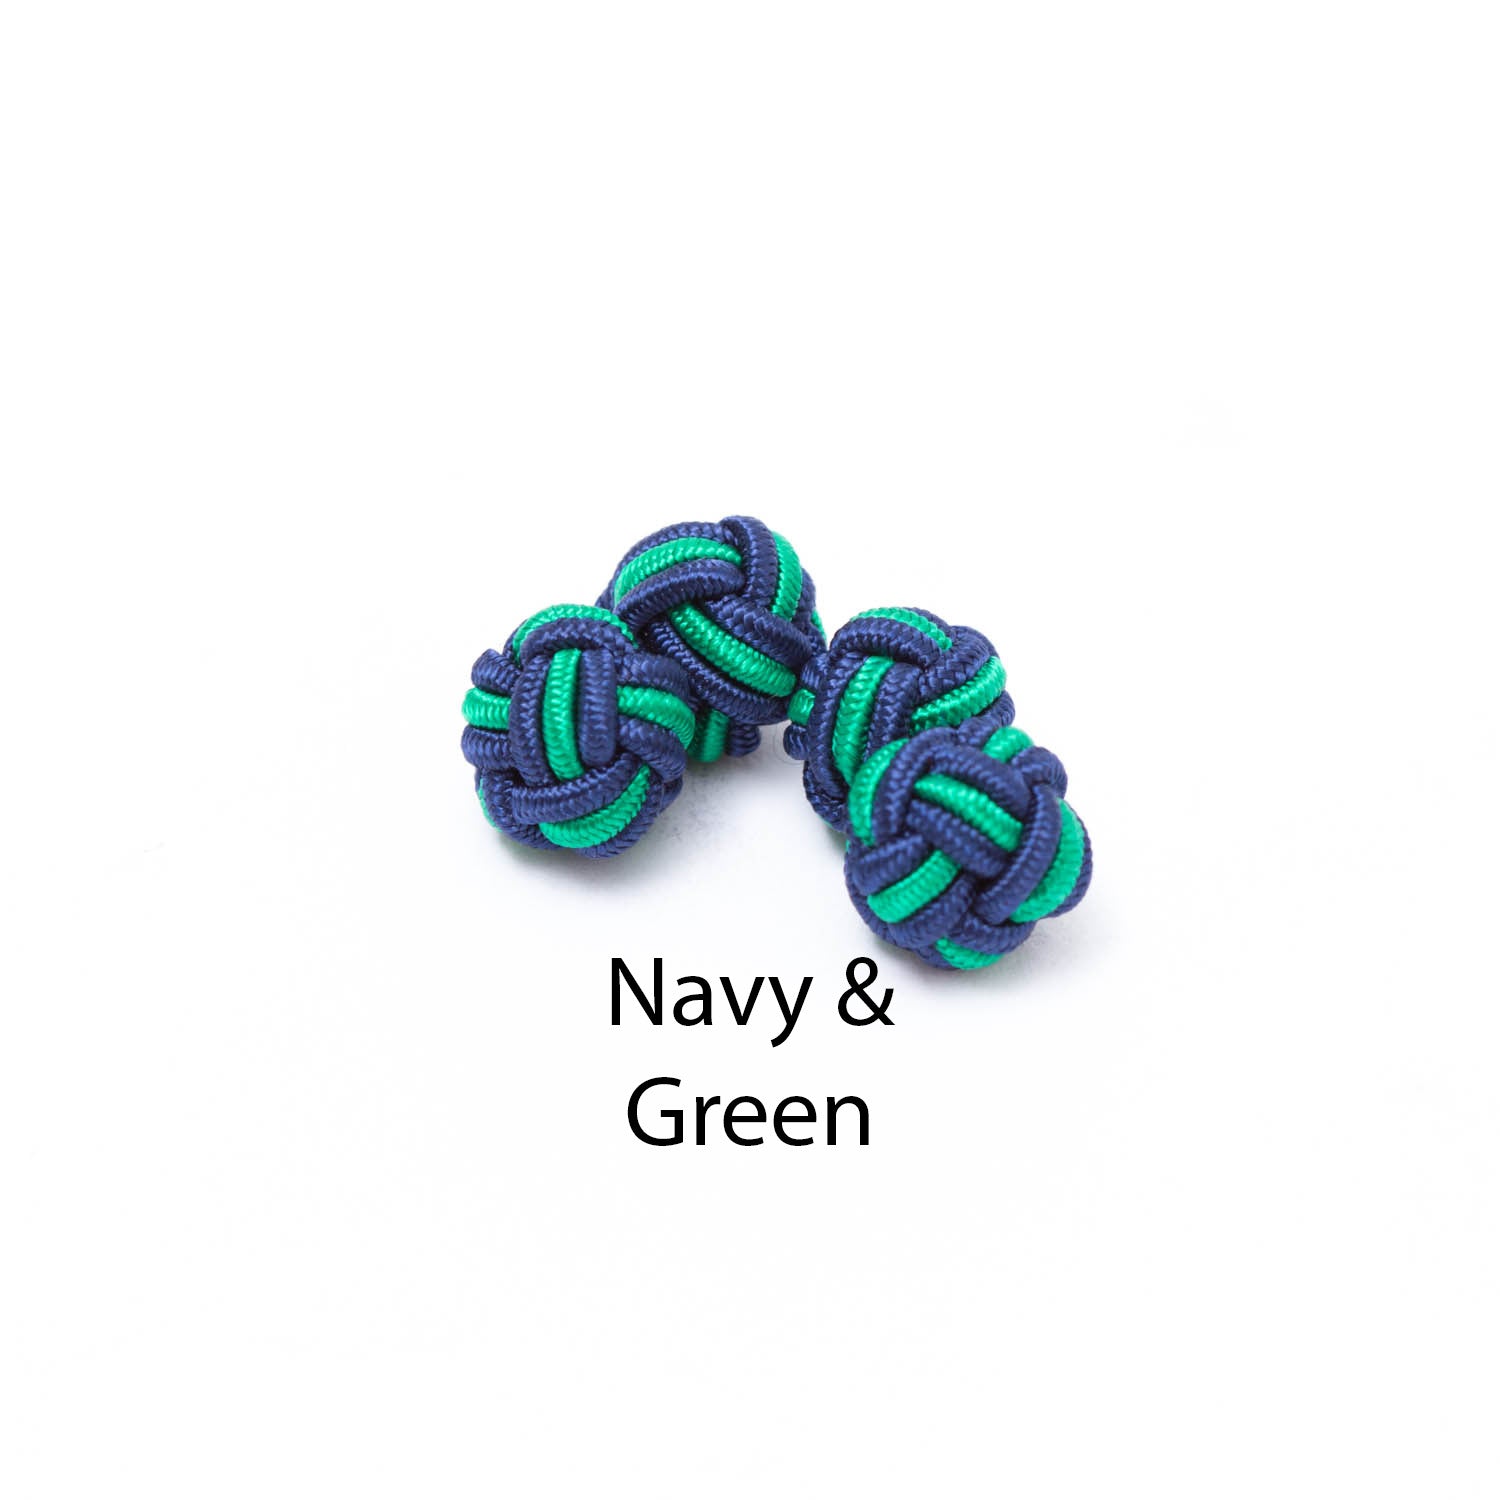 KirbyAllison.com's Dual Colored Knot Cufflinks for double-cuff shirts.